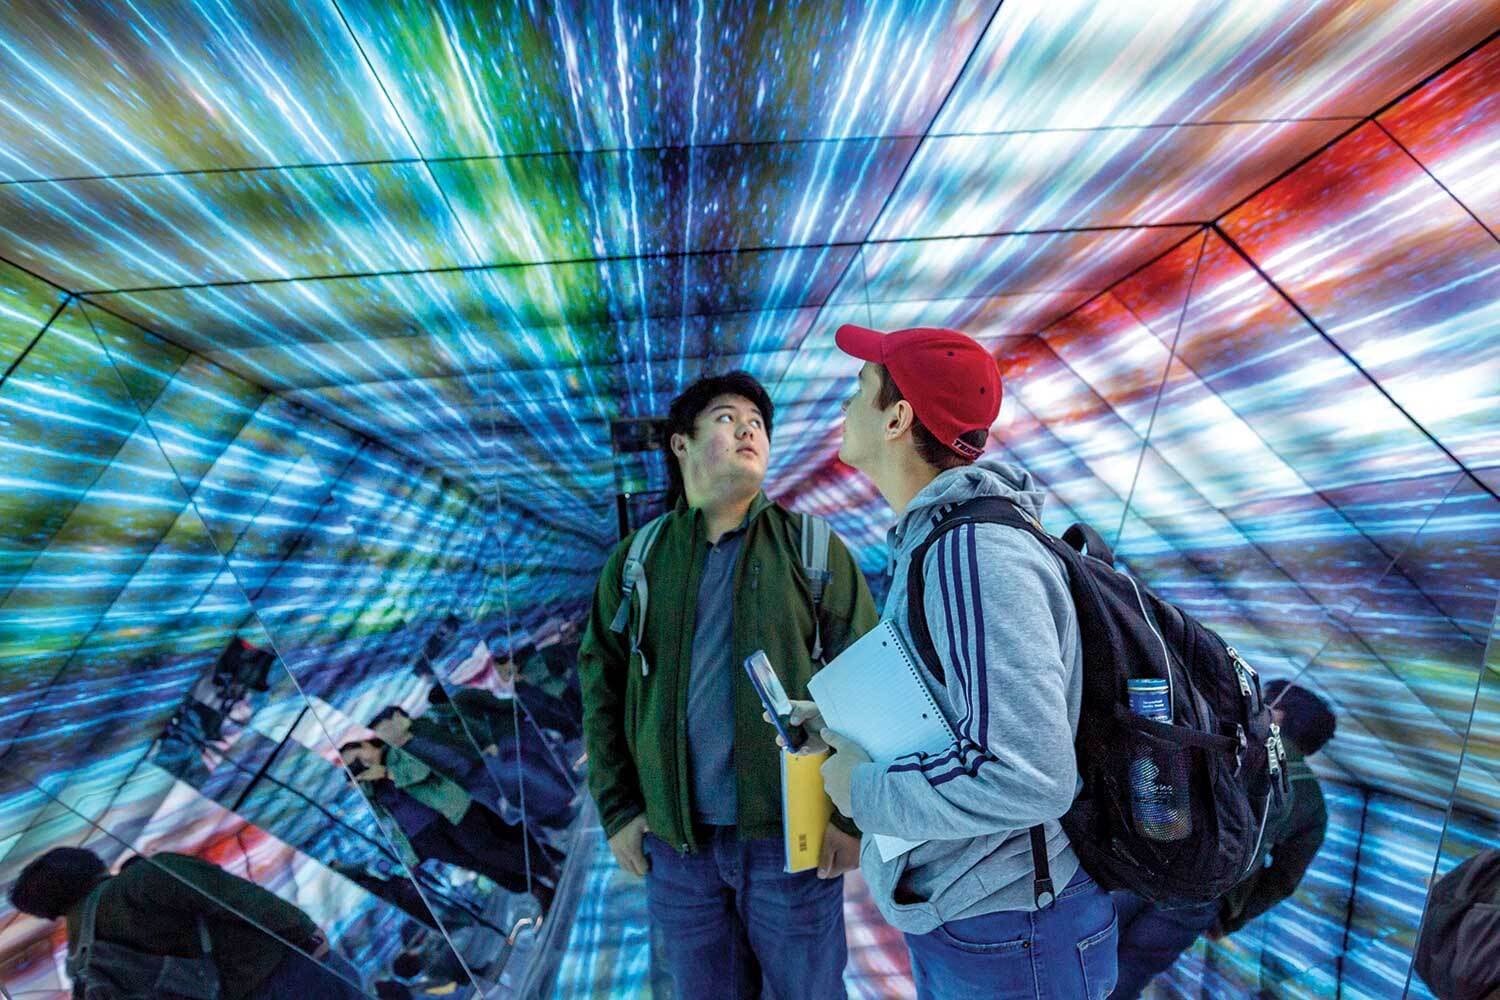 Two students stand amazed and confused in a hexagonal mirror-walled room with colored lines radiating from a single point that look like a science fiction warp drive but in color.